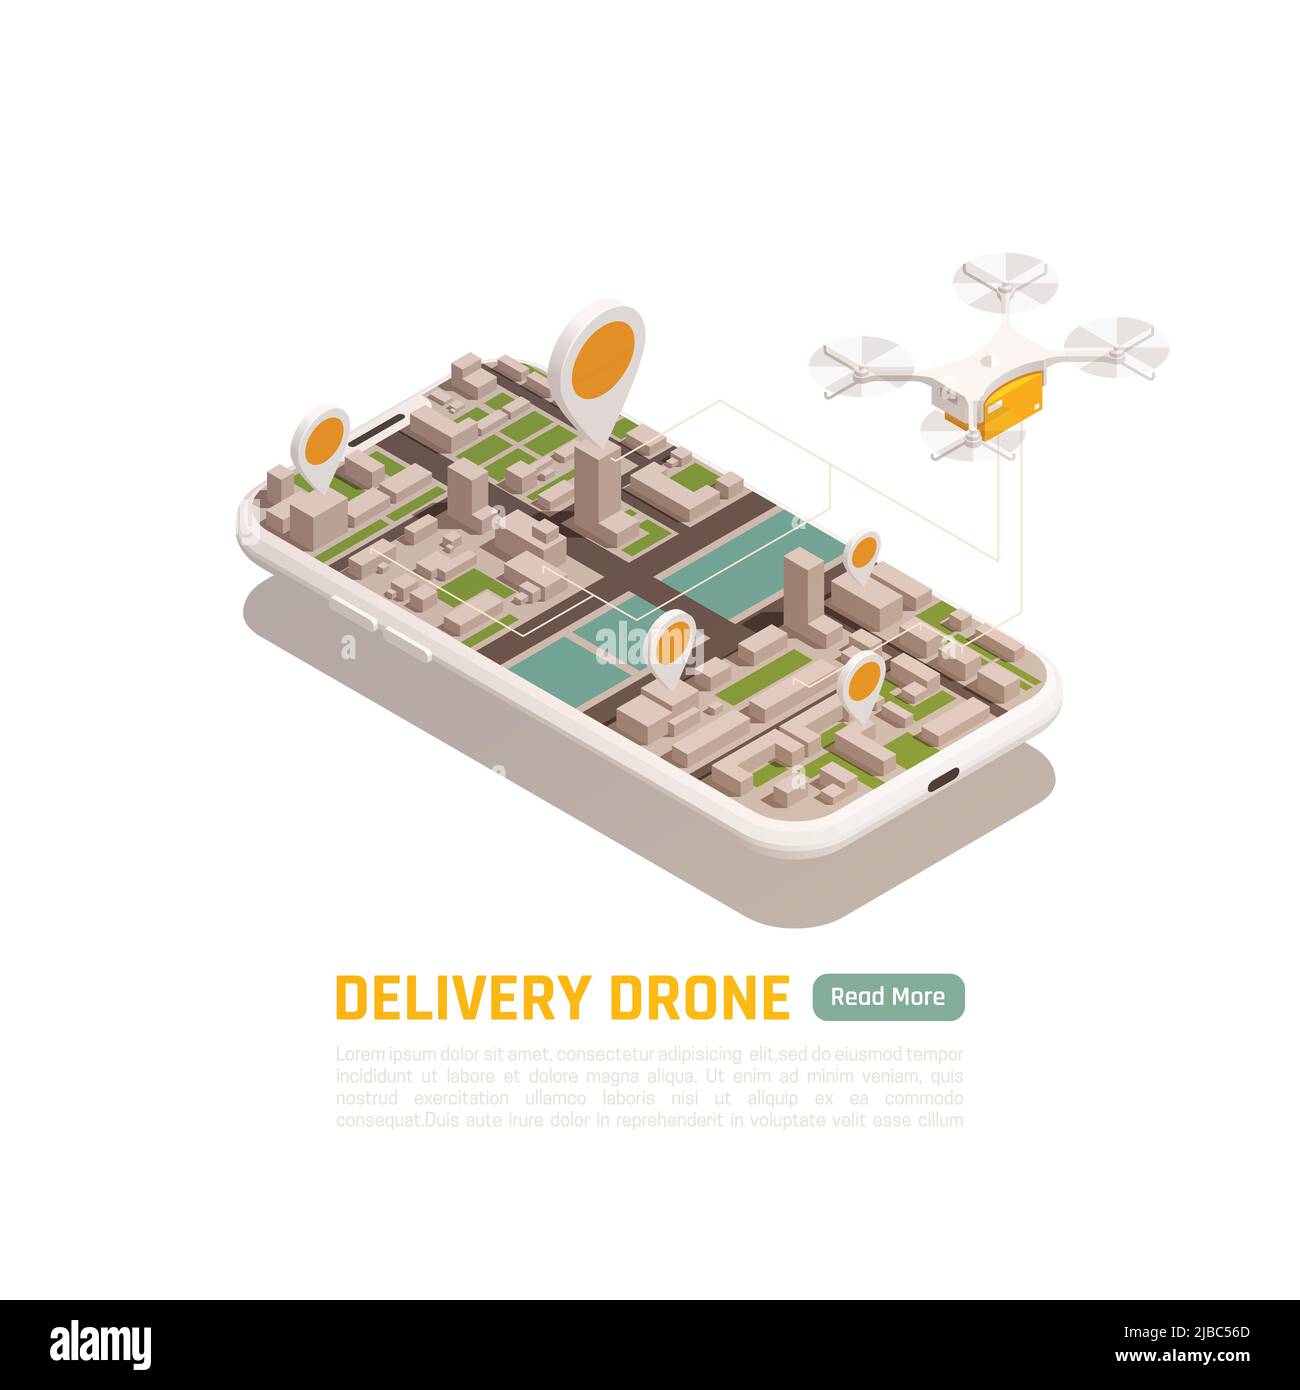 Drones quadrocopters isometric  background with conceptual images of city buildings inside smartphone frame with flying quadcopter vector illustration Stock Vector